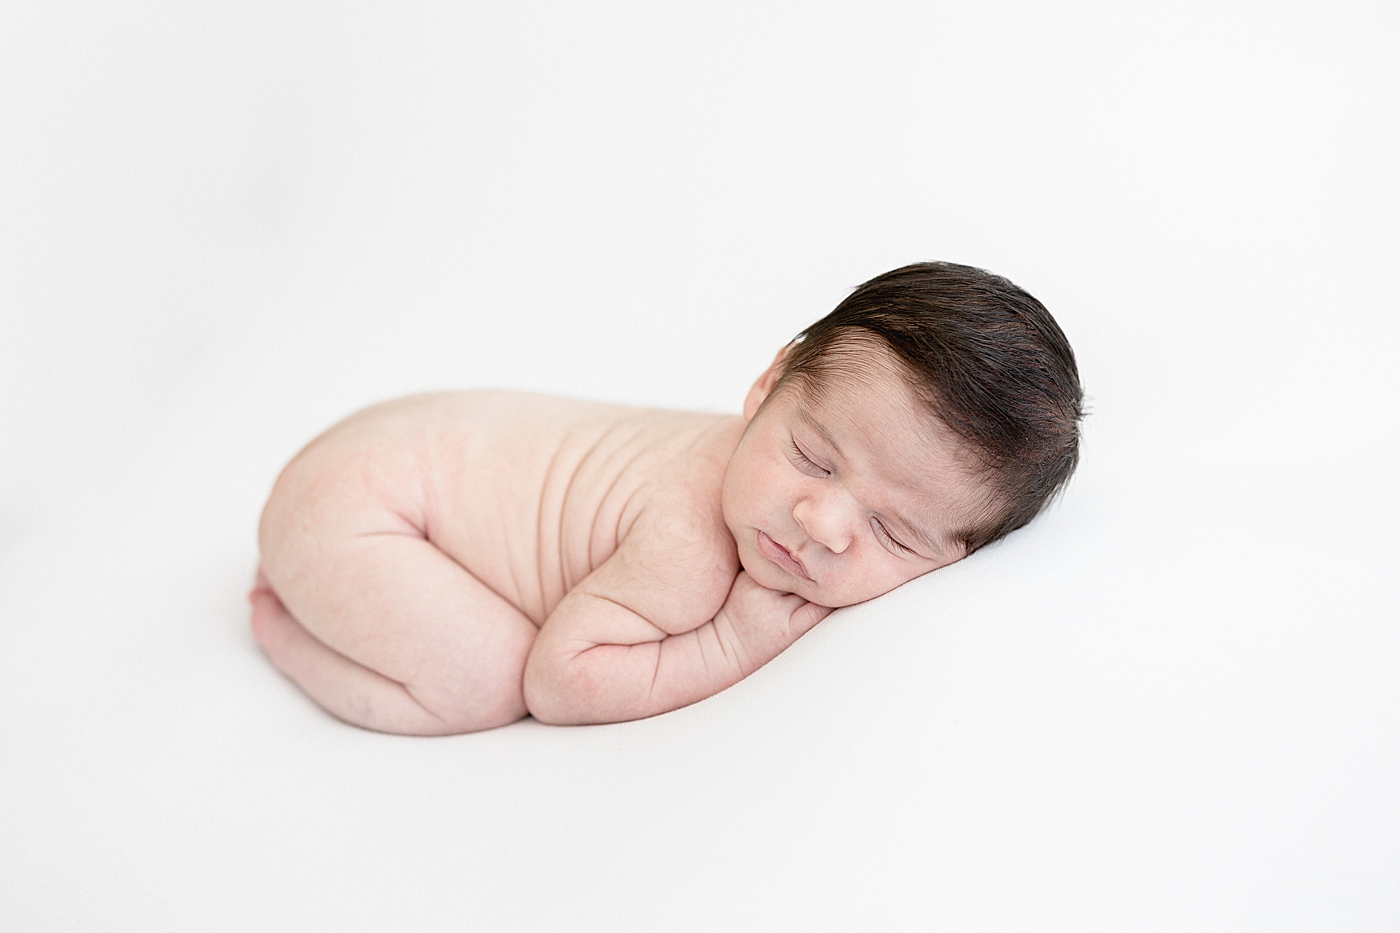 Baby posed on his belly for newborn photos. Photo by Brittany Elise Photography.